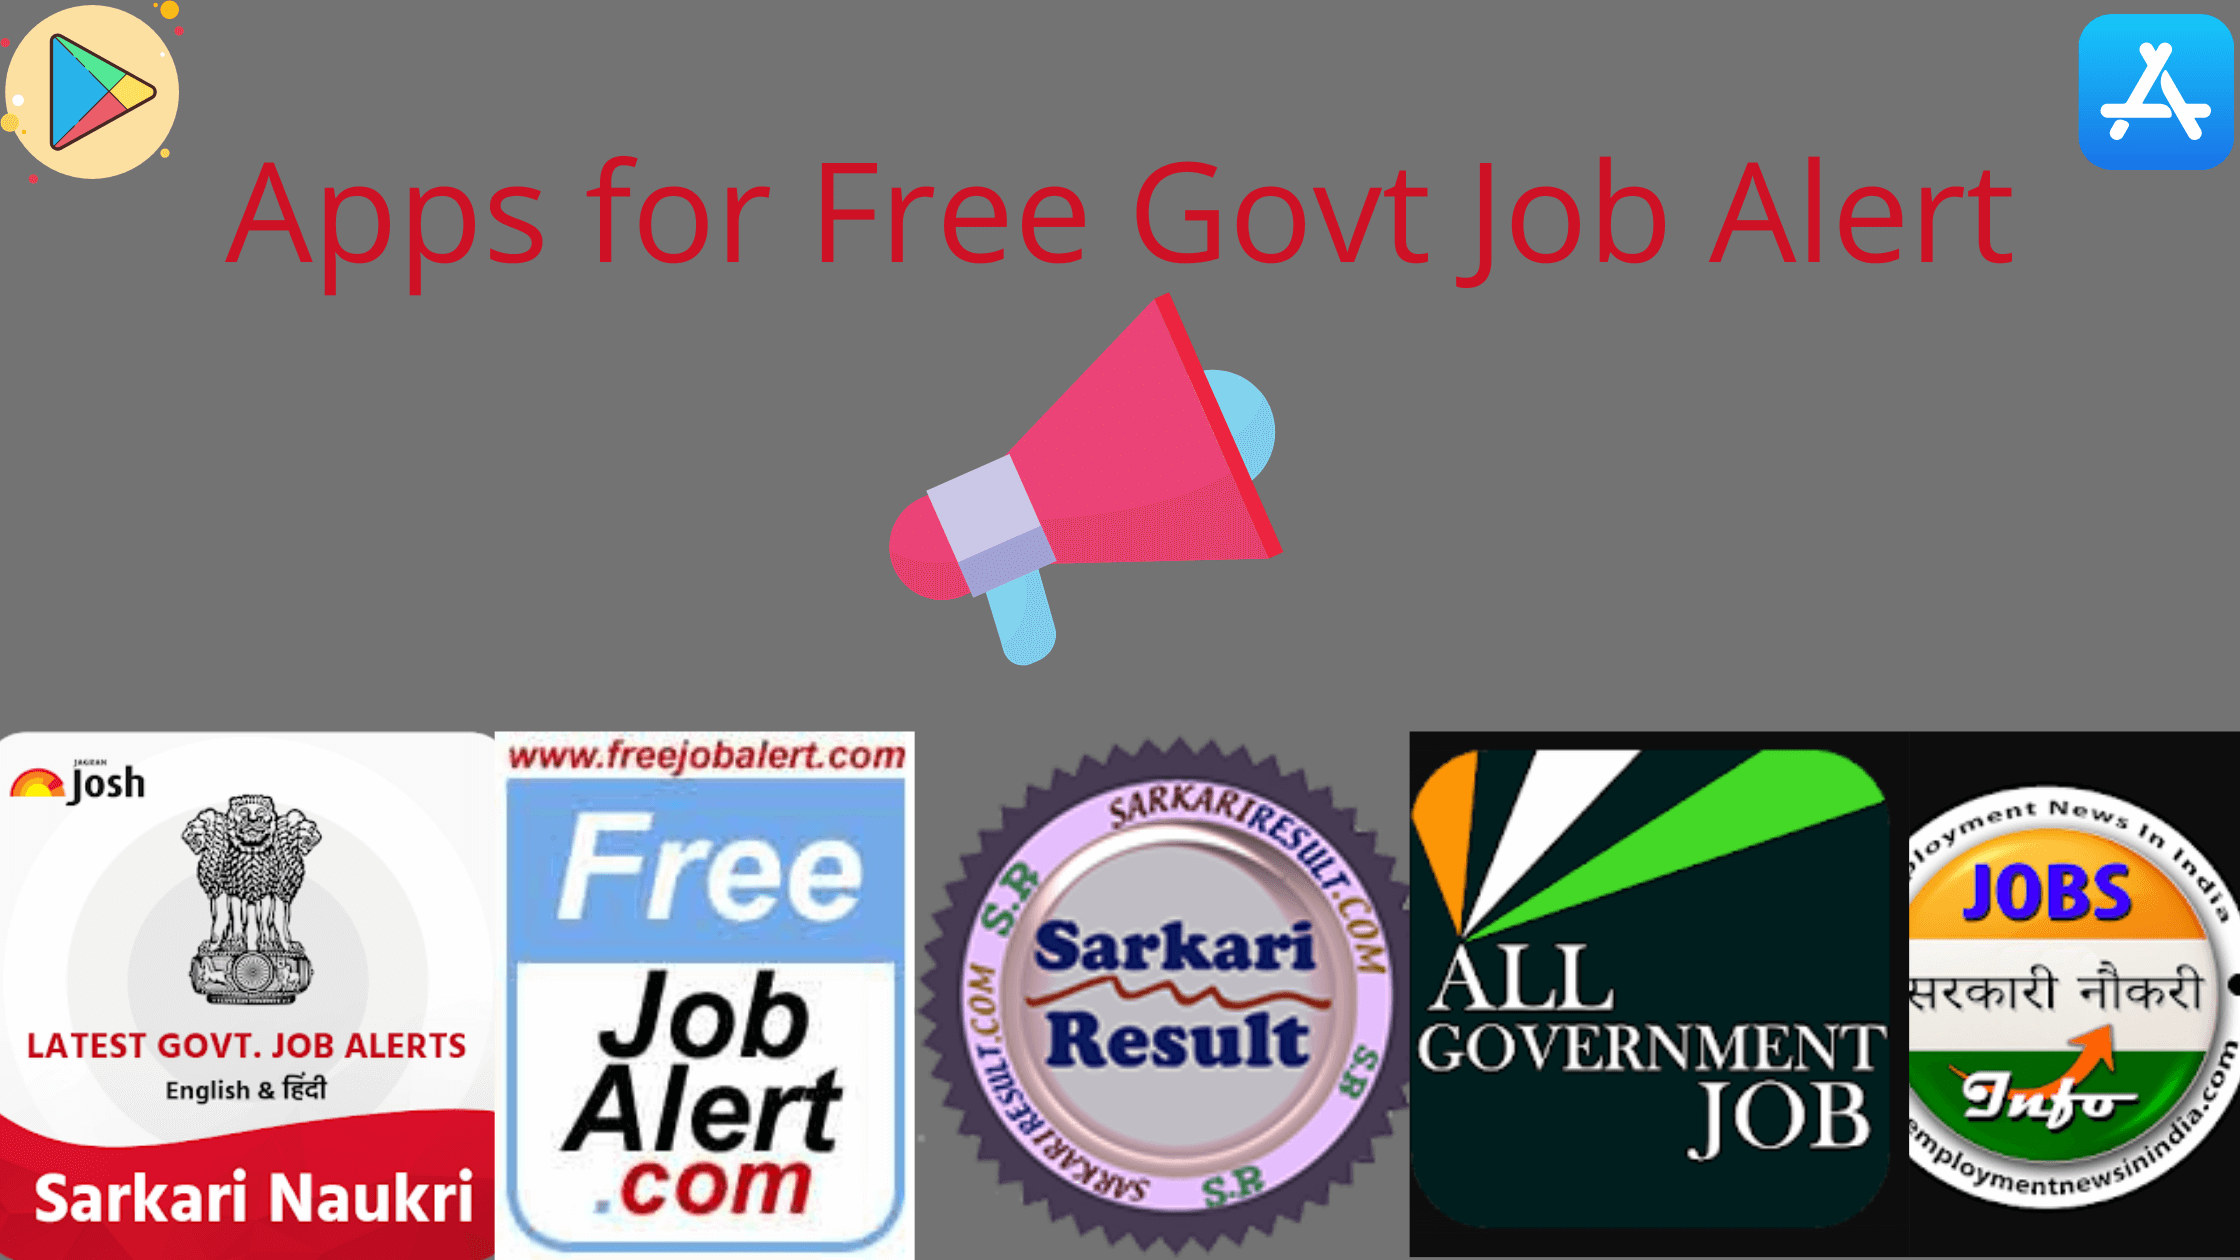 Best Android App for Free Government Job Alert